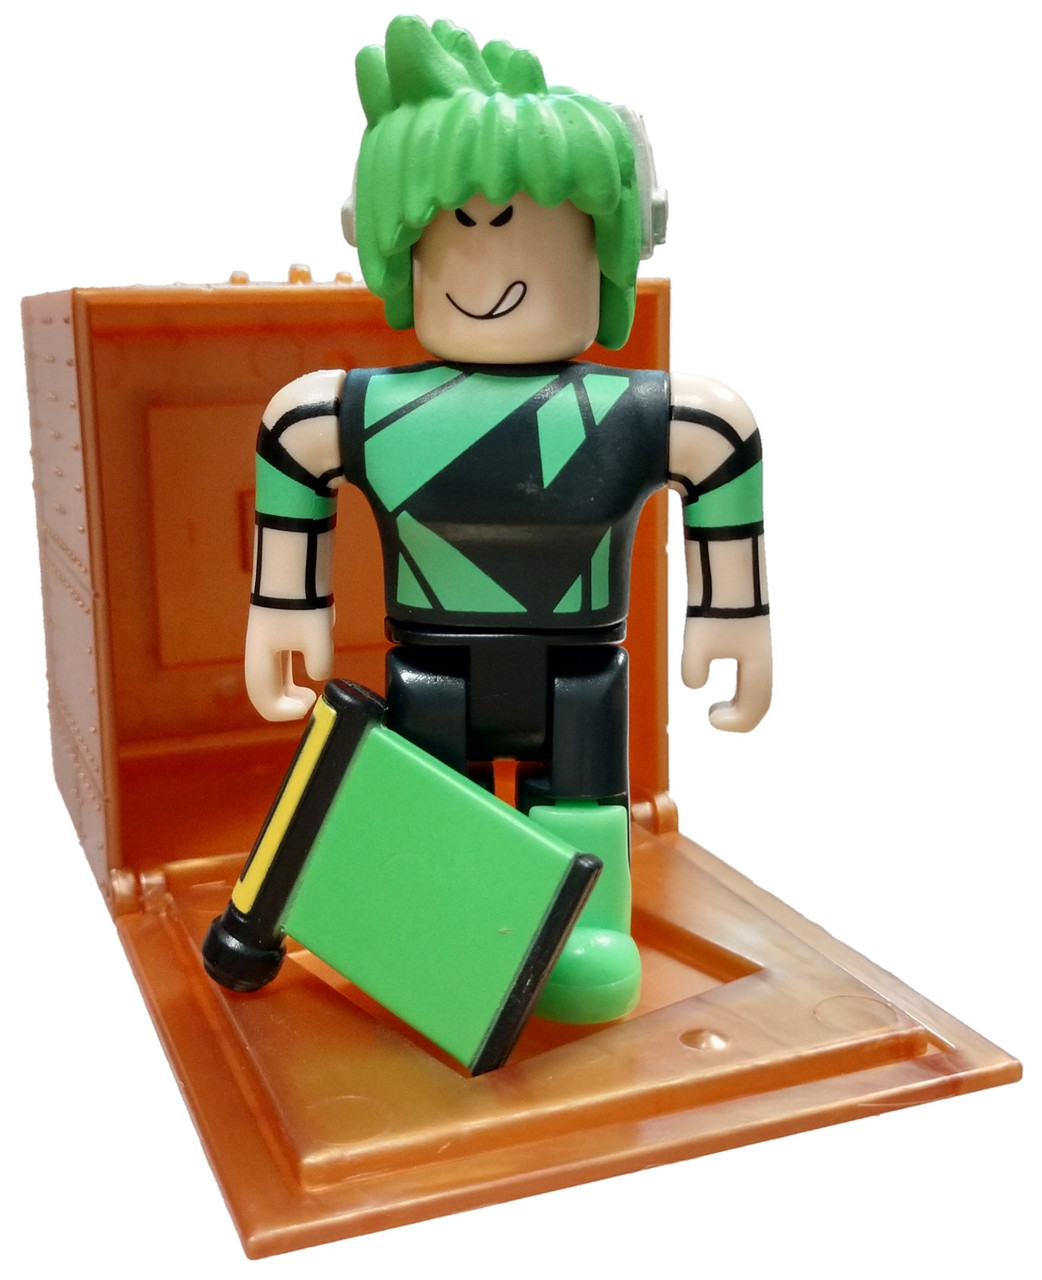 Roblox Series 8 Texting Simulator Future Tech Boy 3 Mini Figure With Cube And Online Code Loose Jazwares Toywiz - skate legend roblox limited simulator